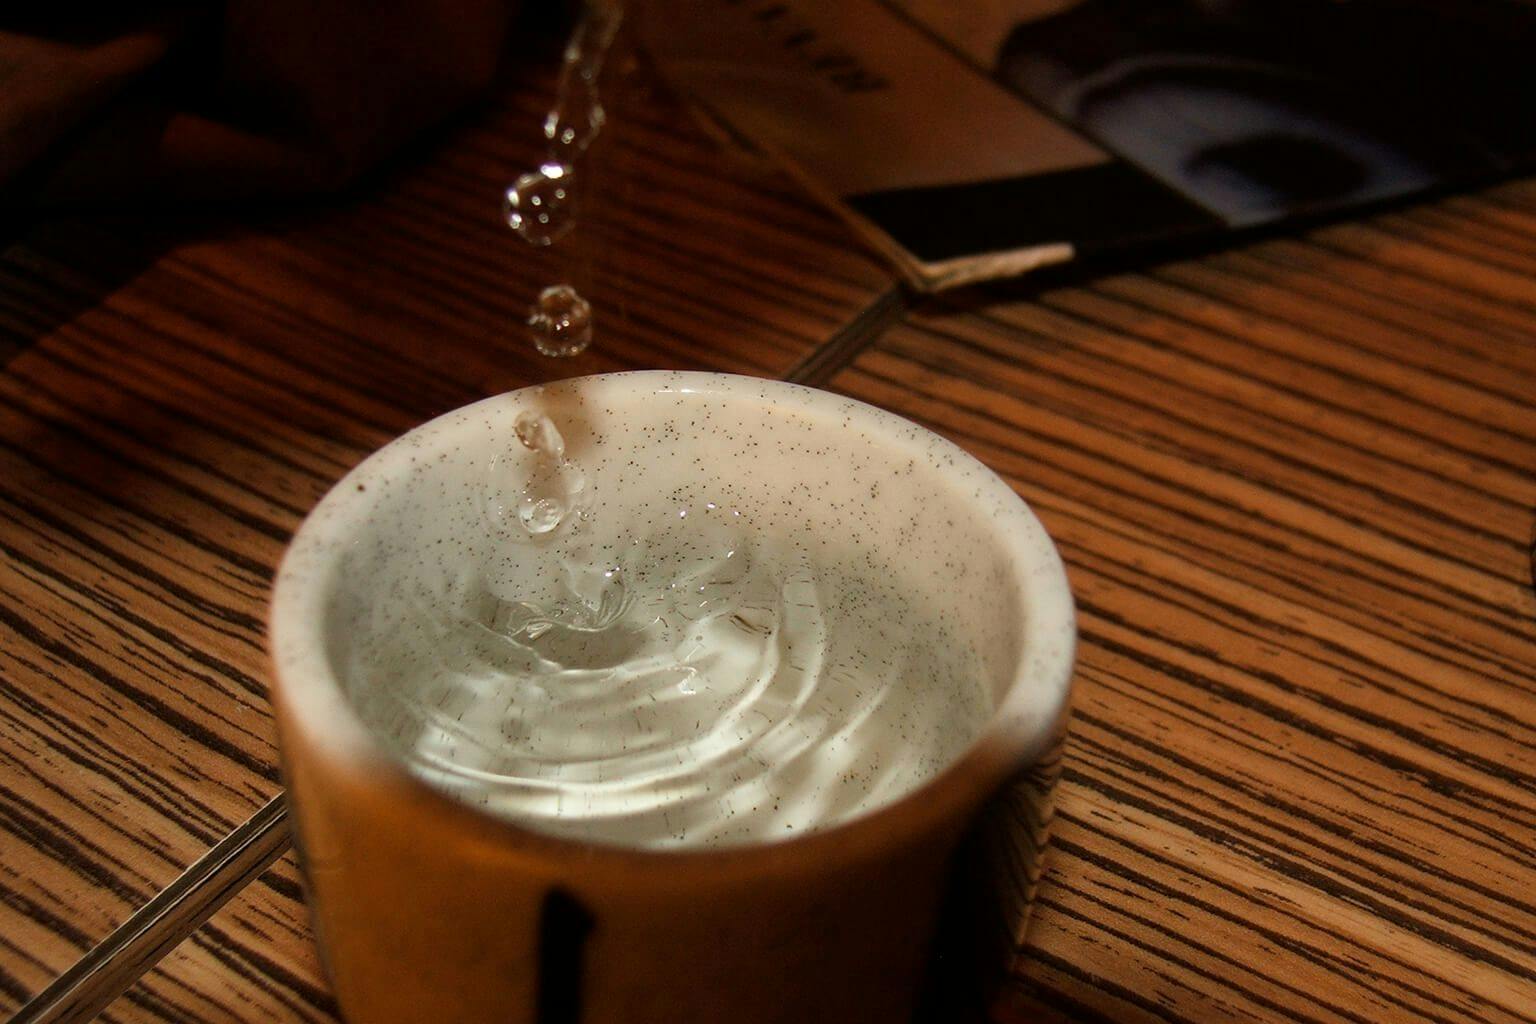 A moment of sake is poured